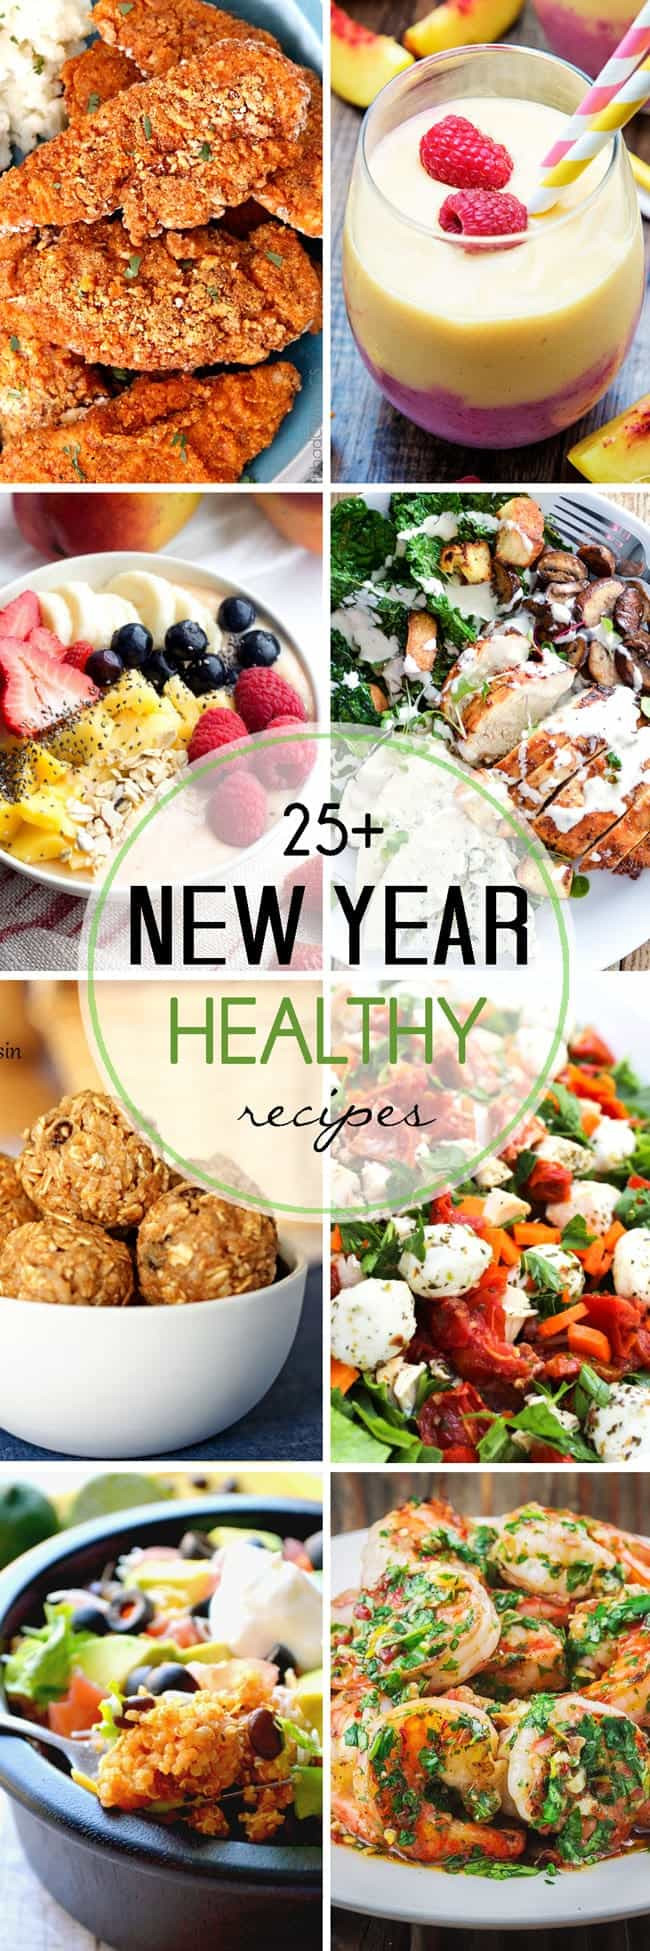 New Year Snacks Recipe
 25 Healthy Recipes For The New Year LemonsforLulu